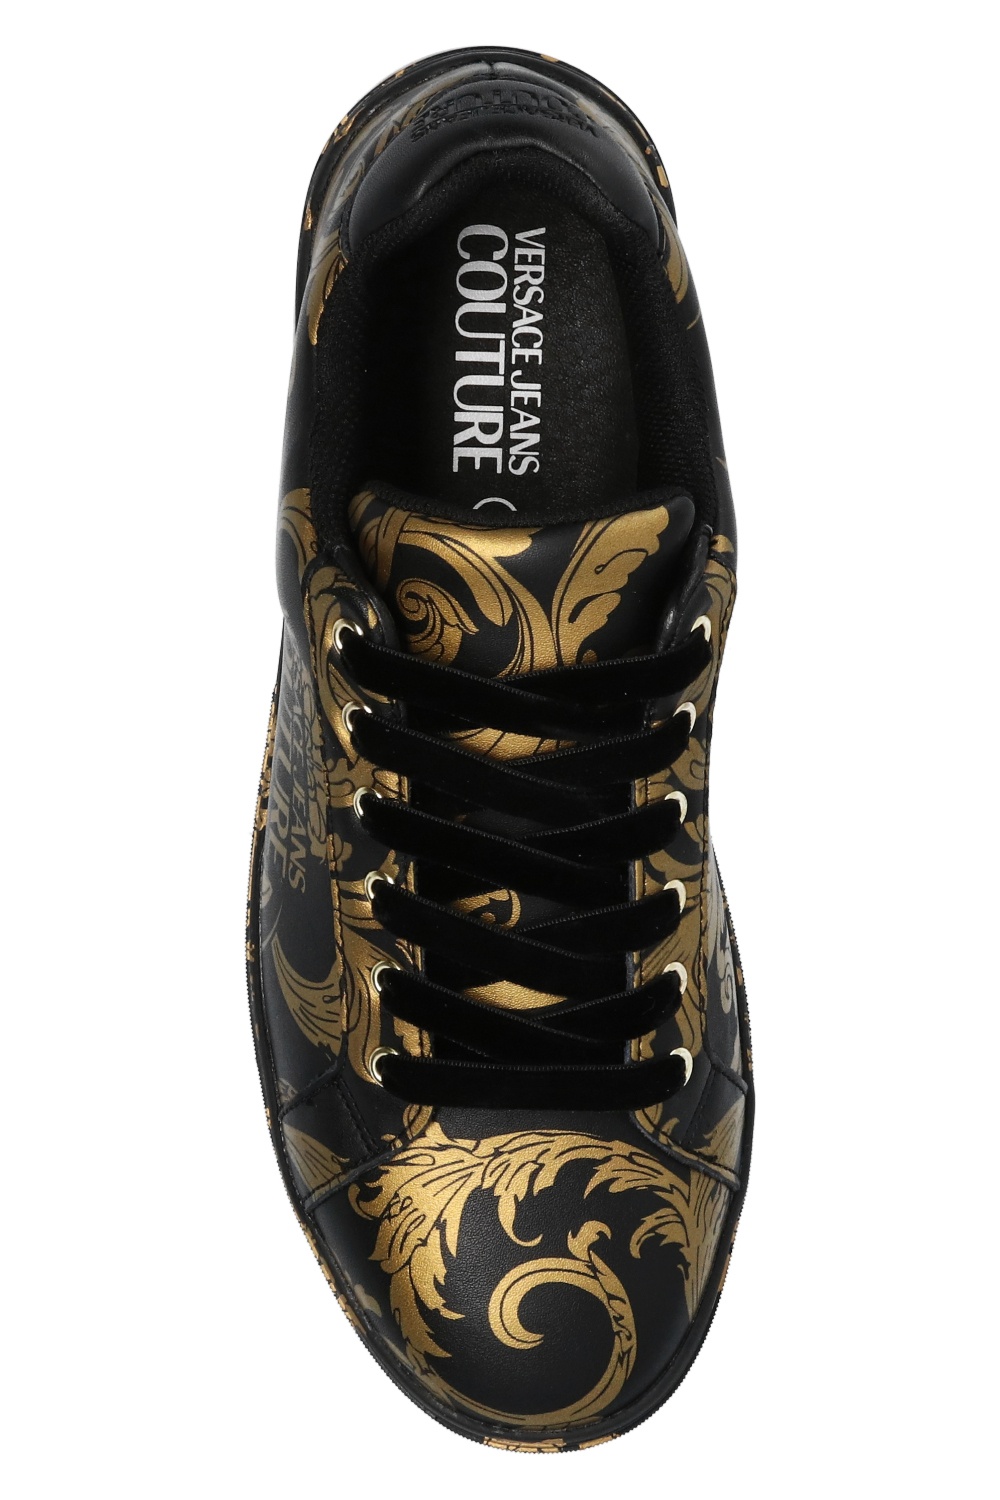 Versace Jeans Couture Barocco-printed sneakers | Women's Shoes 